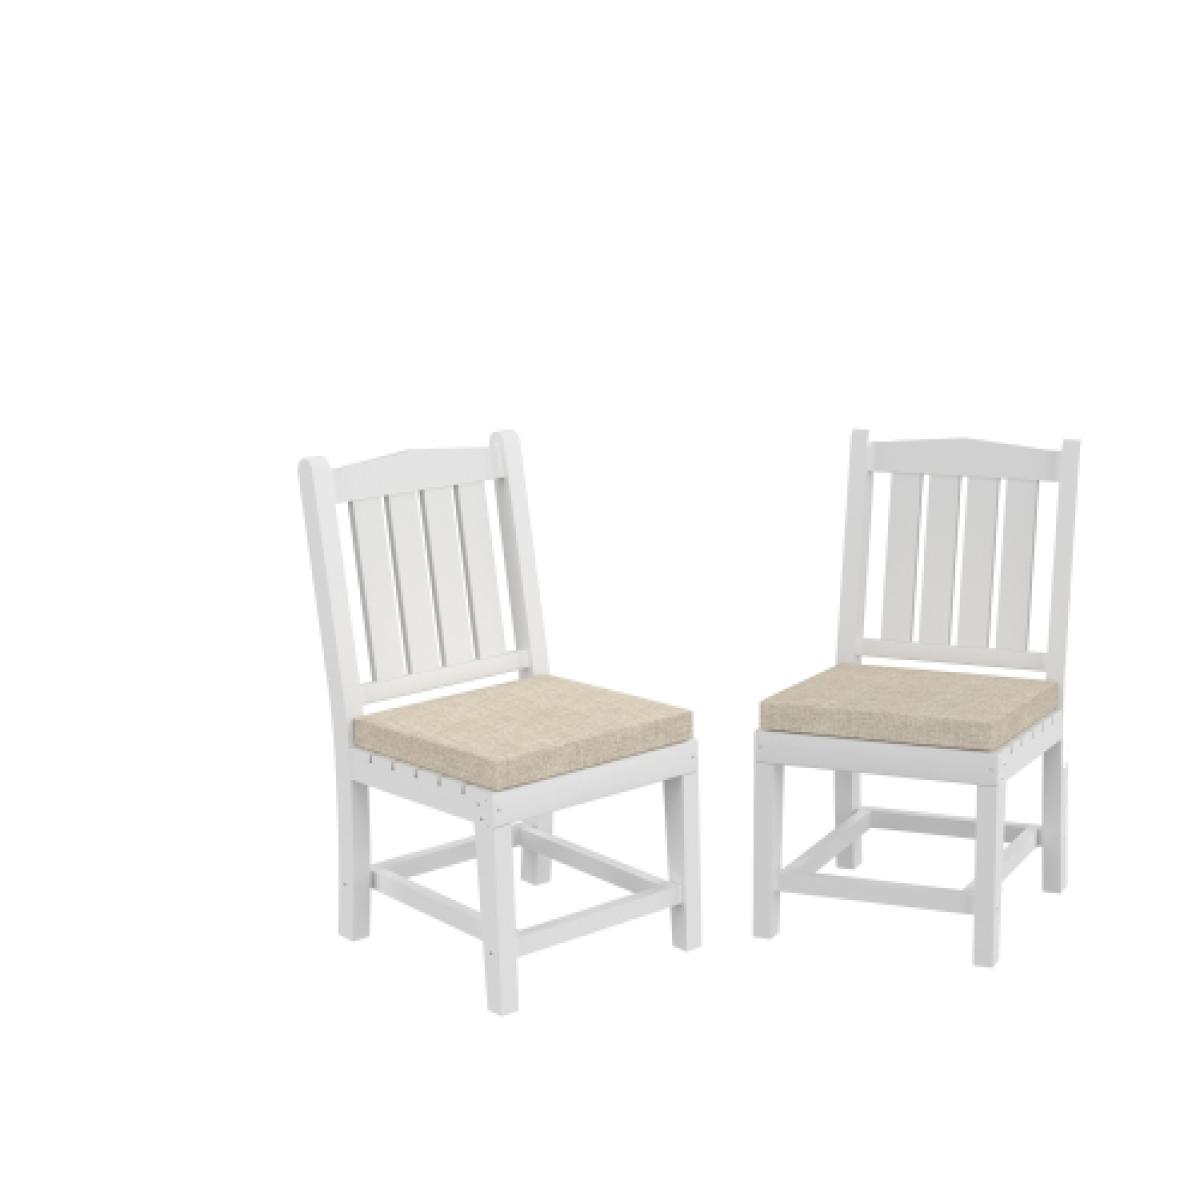 HDPE Dining Chair, White, With Cushion, No Armrest, Set for Playroom, Nursery, Backyard,chair Set of 2